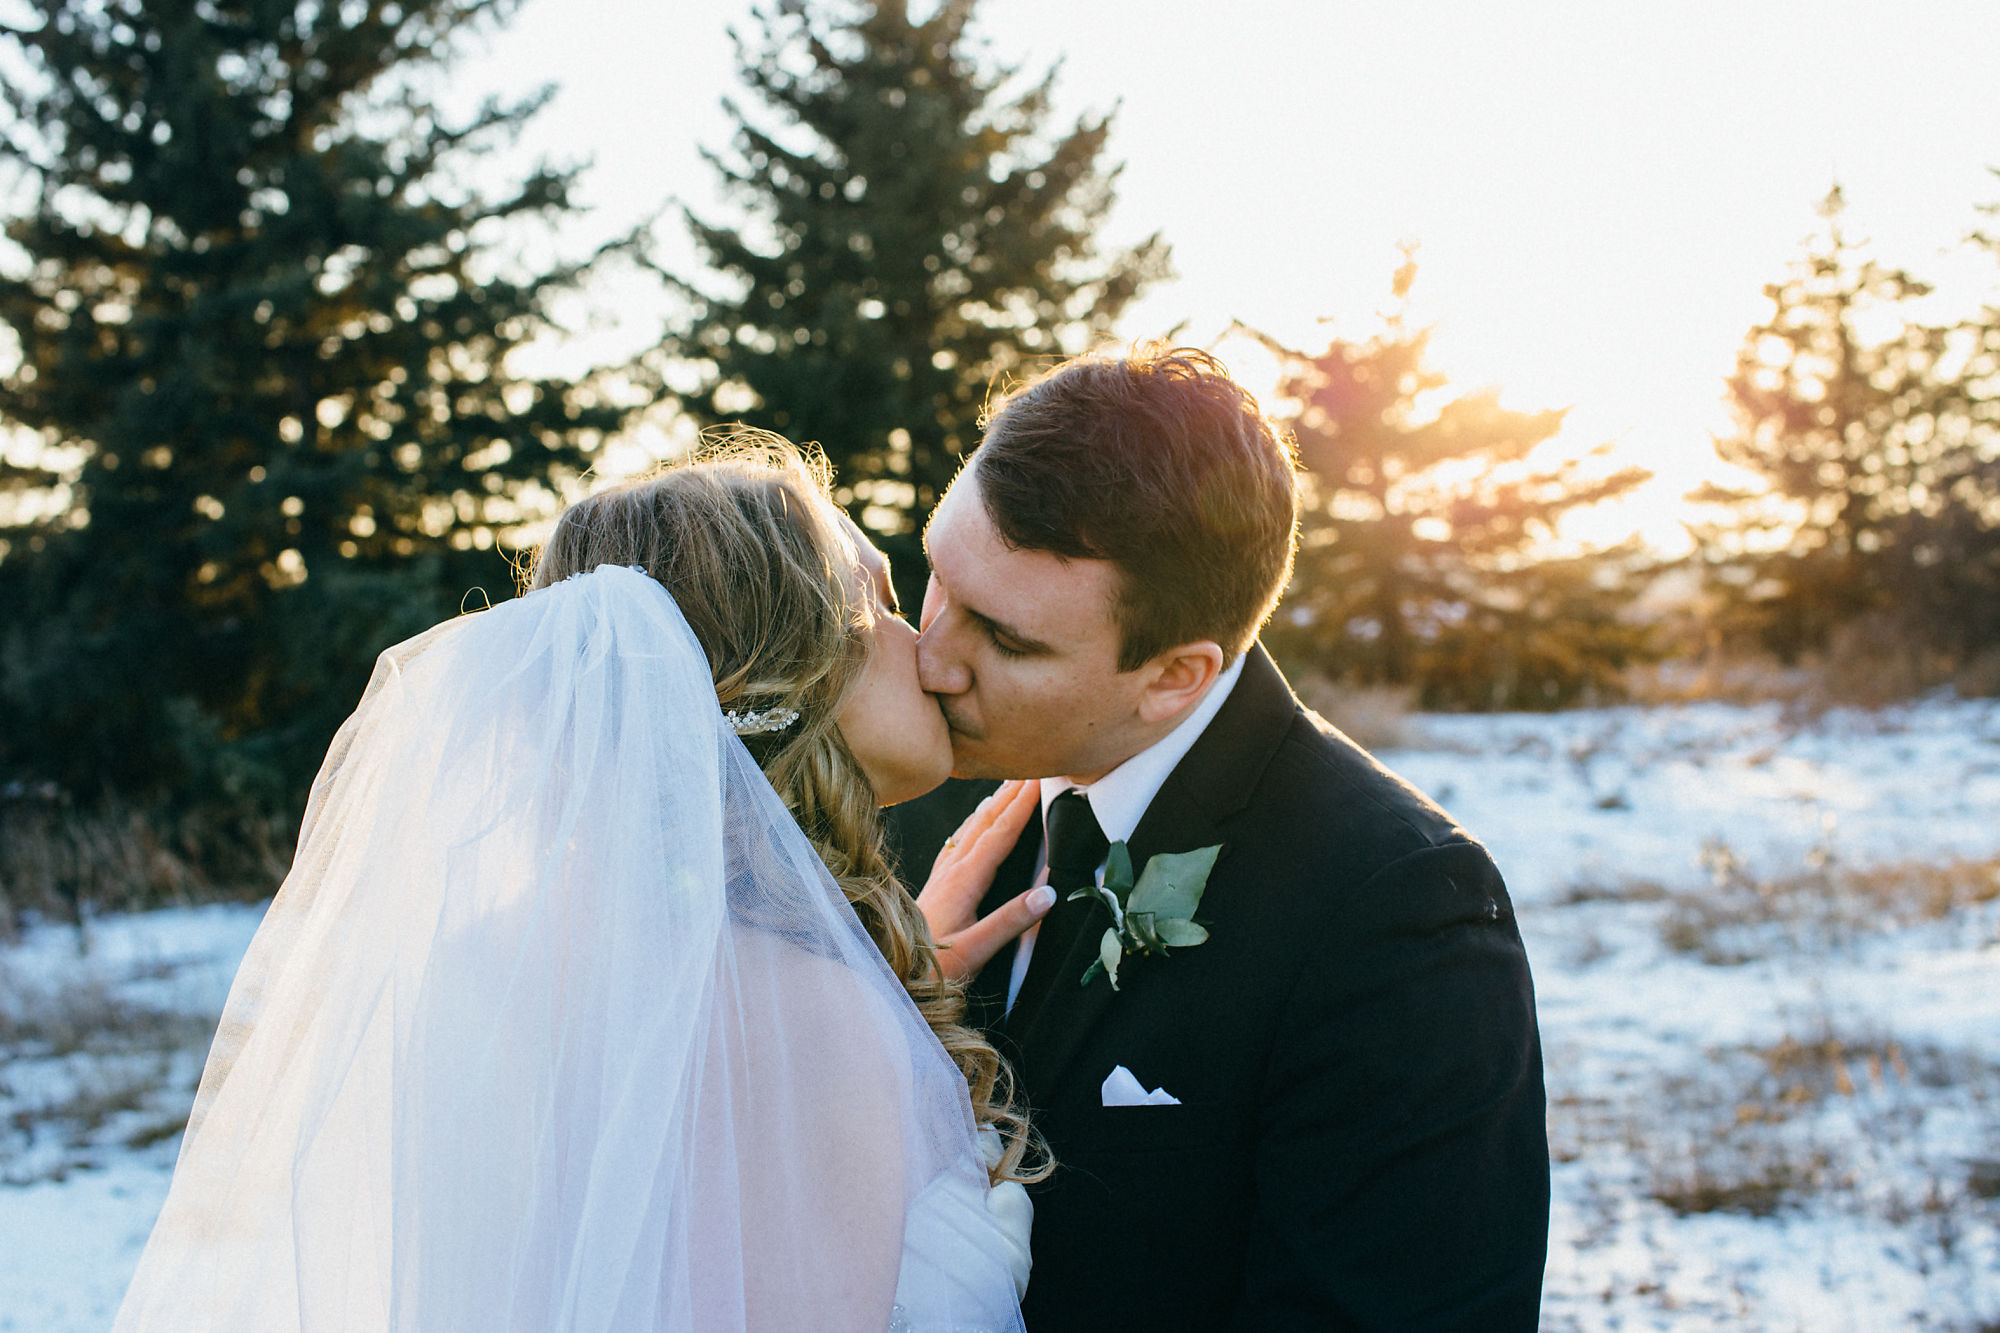 Portrait of the bride and groom kissing at sunset at Lesalle Park during their wedding shot with Burlington Wedding Photographer Jennifer Blaak.